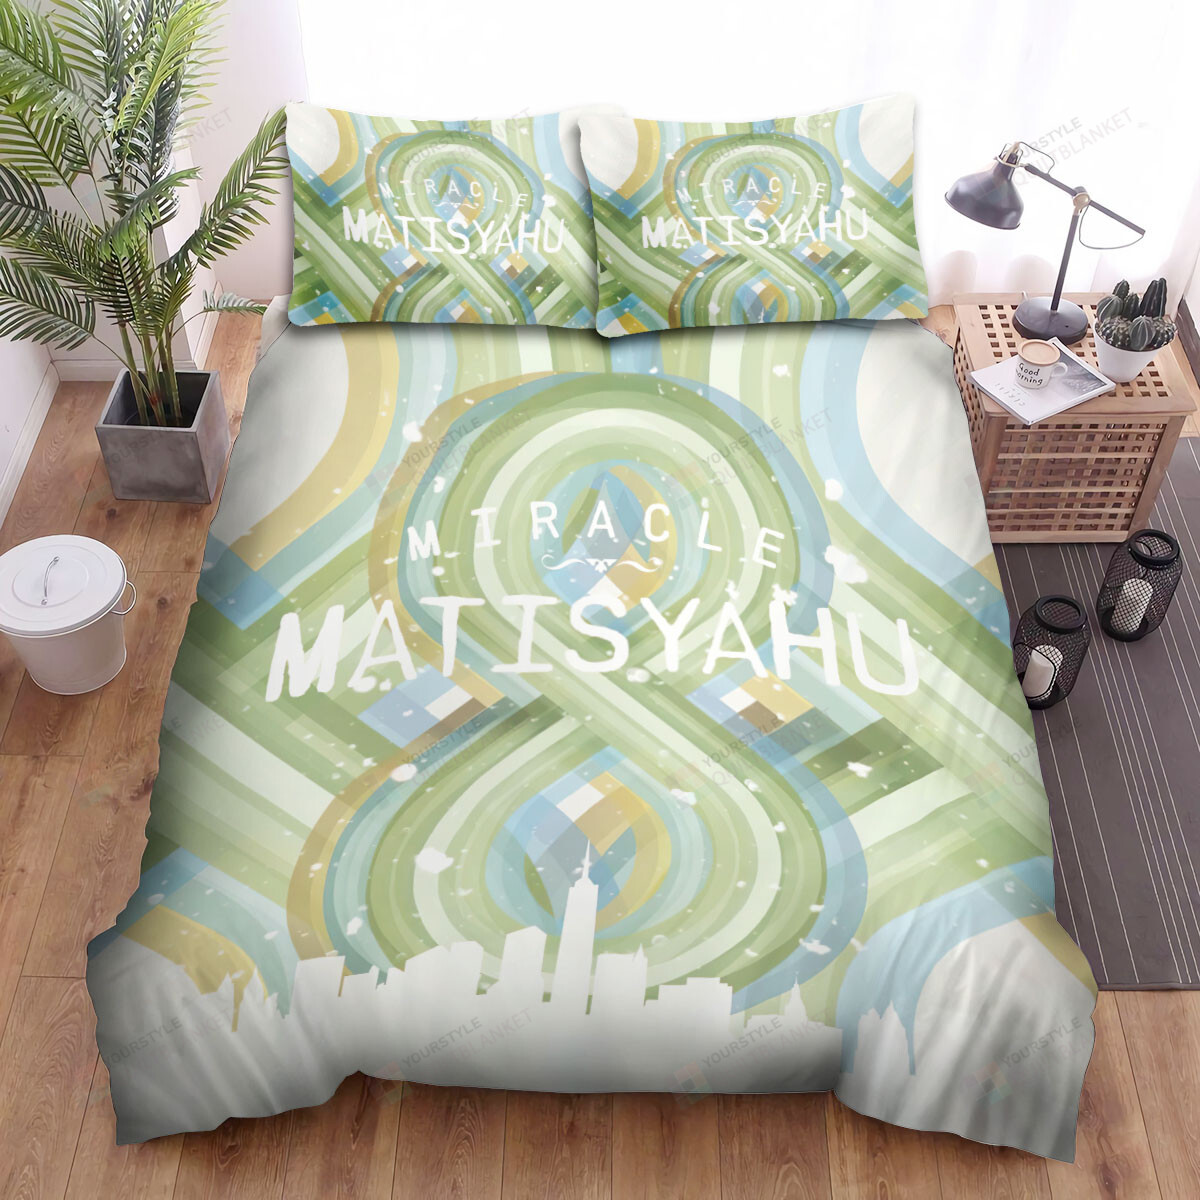 Matisyahu Miracle Bed Sheets Spread Comforter Duvet Cover Bedding Sets